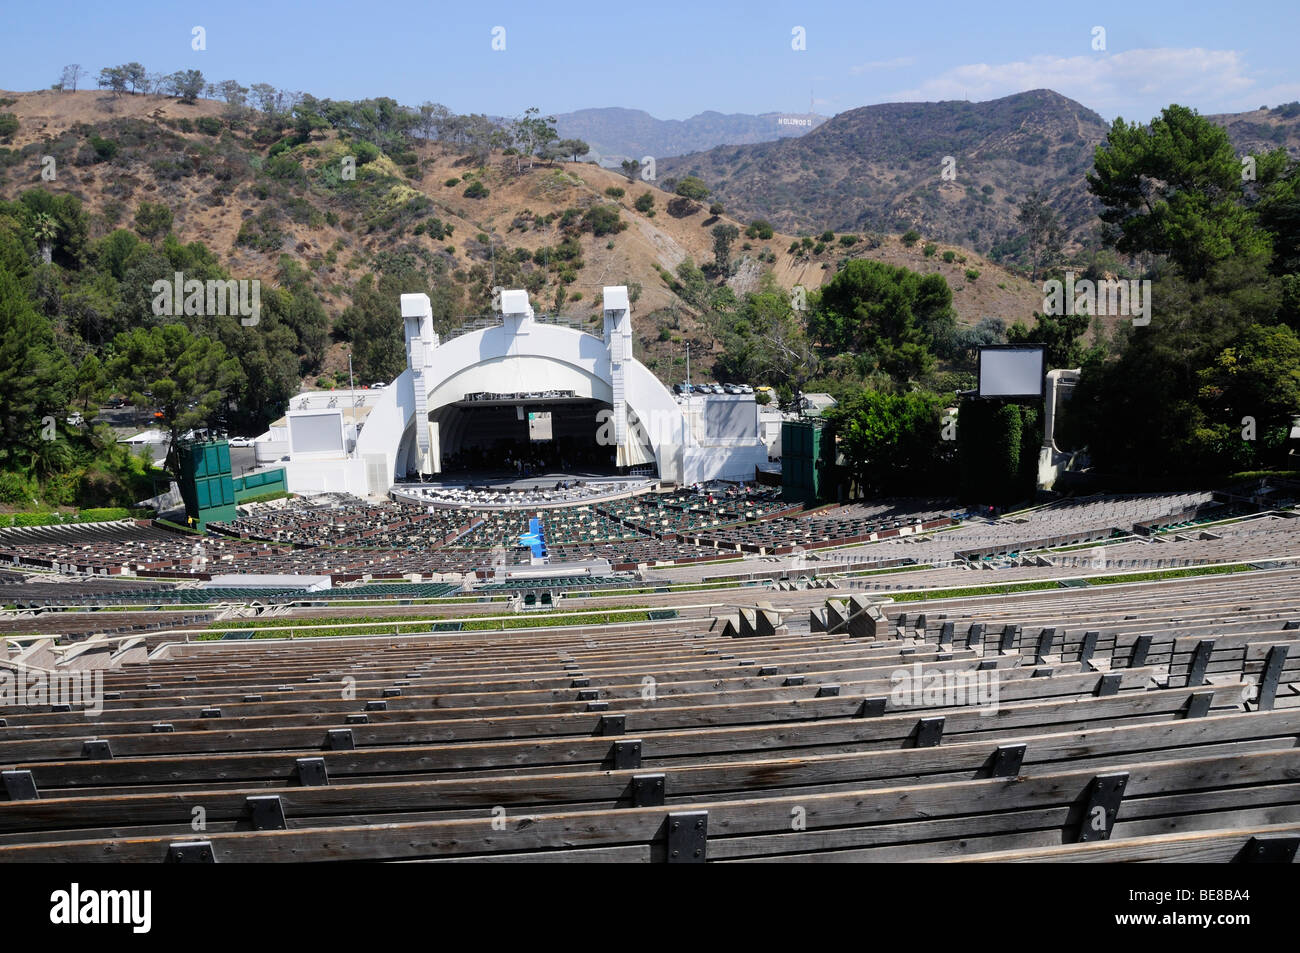 USA, California, Los Angeles, Hollywood Bowl stage. Stock Photo